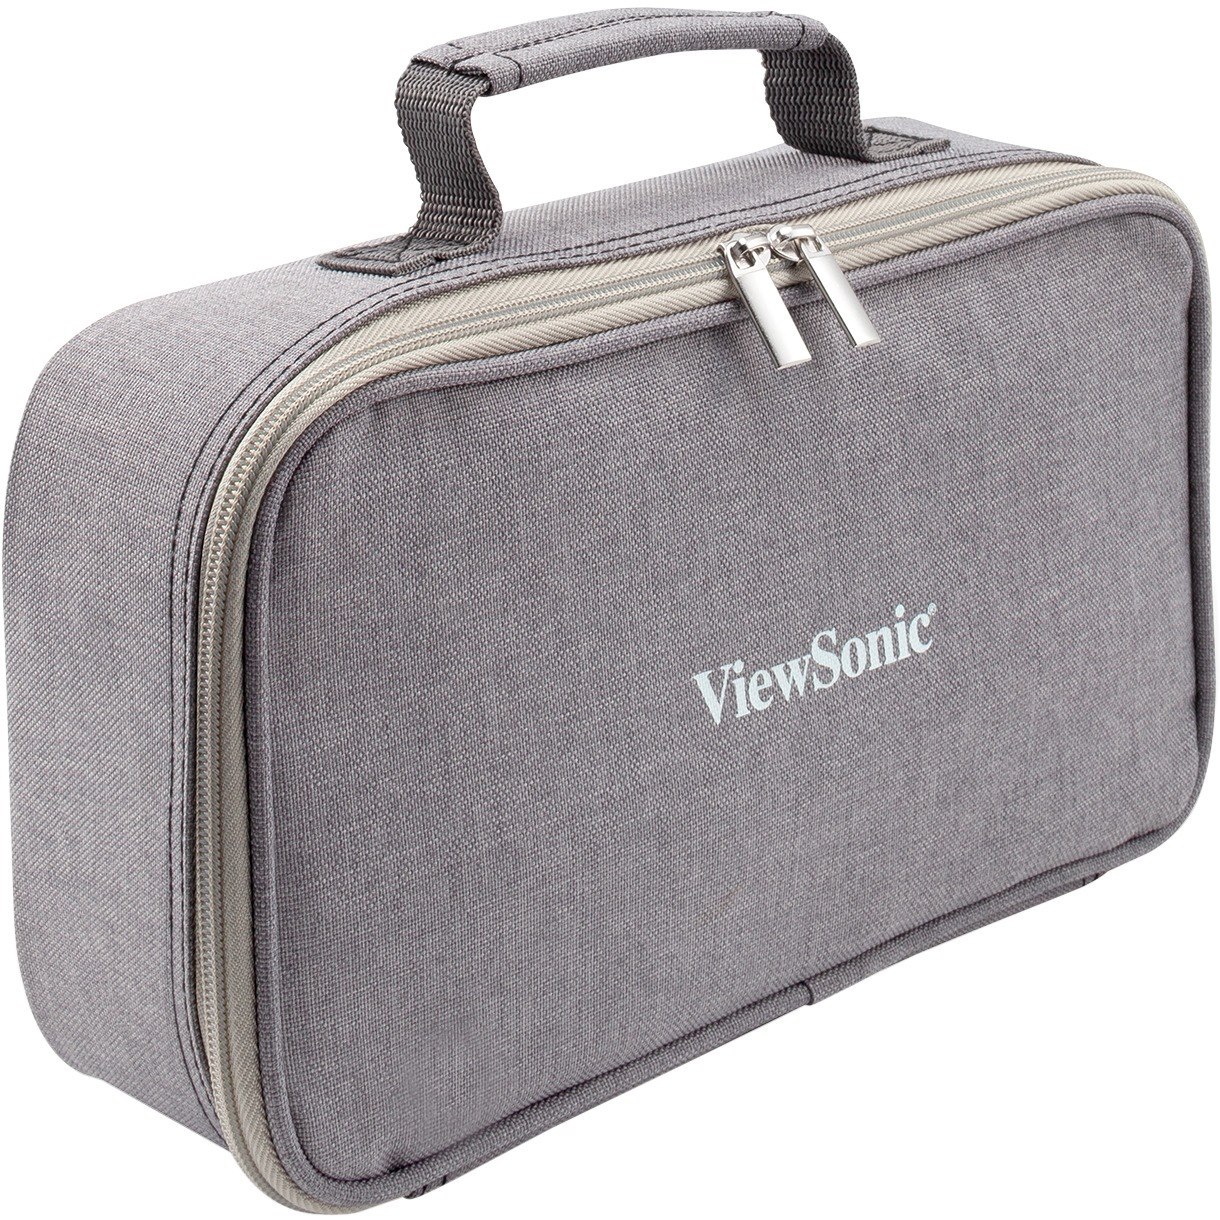 ViewSonic Carrying Case Portable Projector